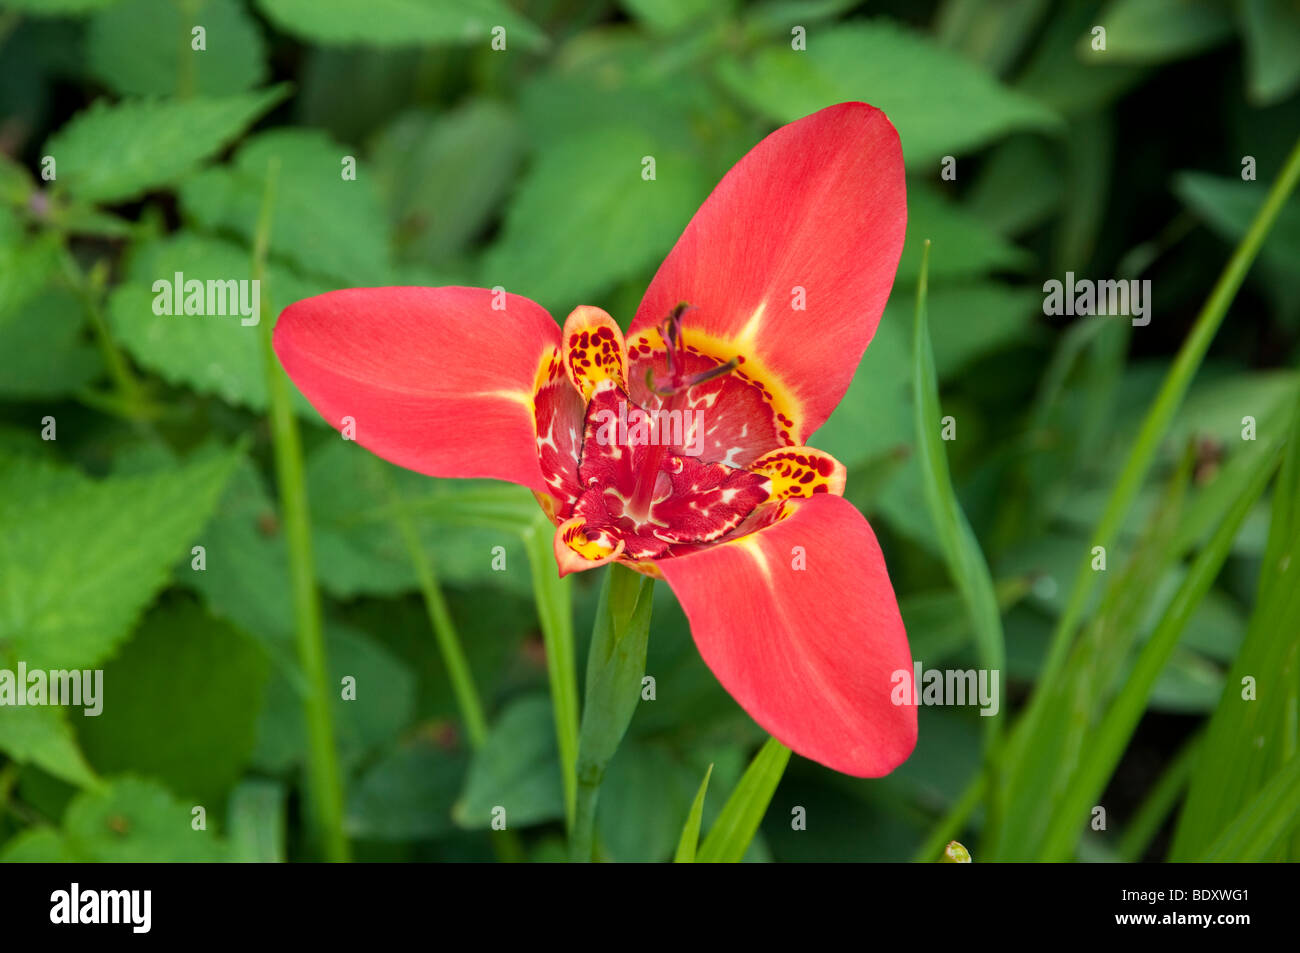 Closeups of a red Mexican Shell flower in the English Gardens of the Assiniboine Park in Winnipeg, Manitoba, Canada. Stock Photo